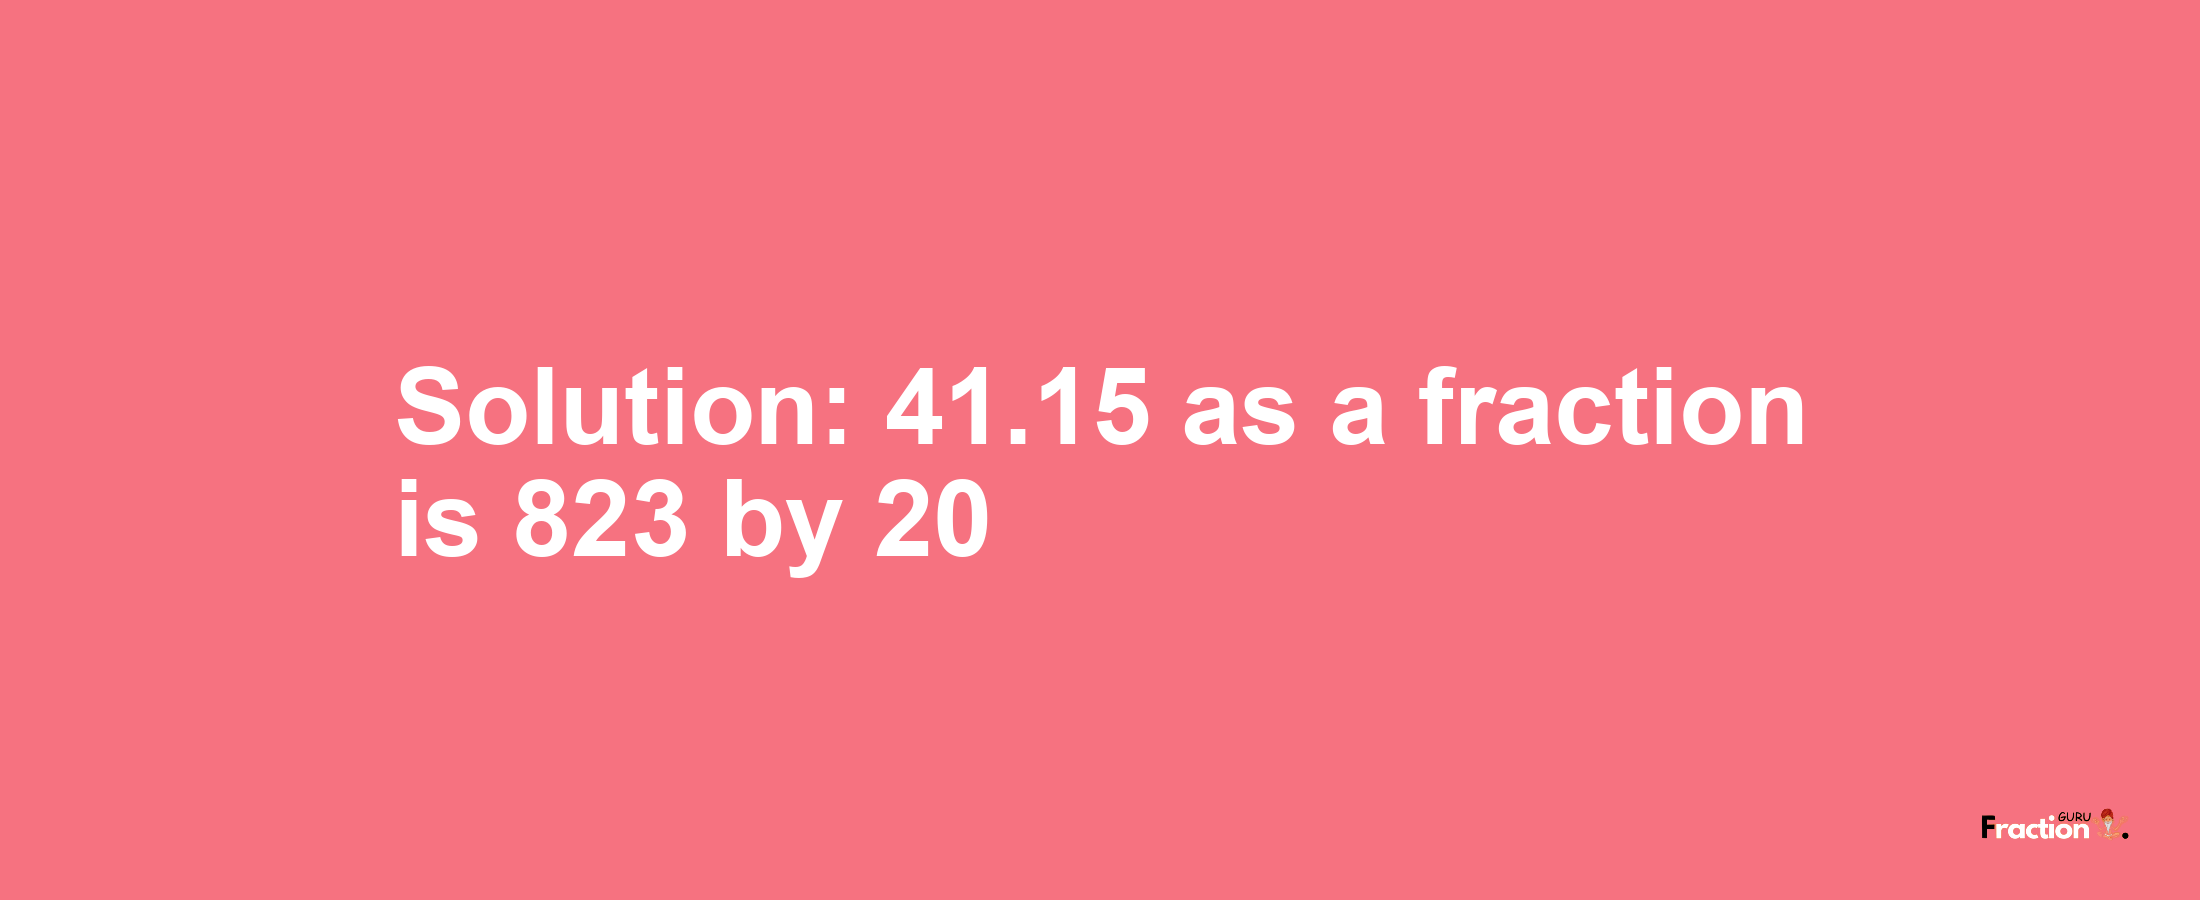 Solution:41.15 as a fraction is 823/20